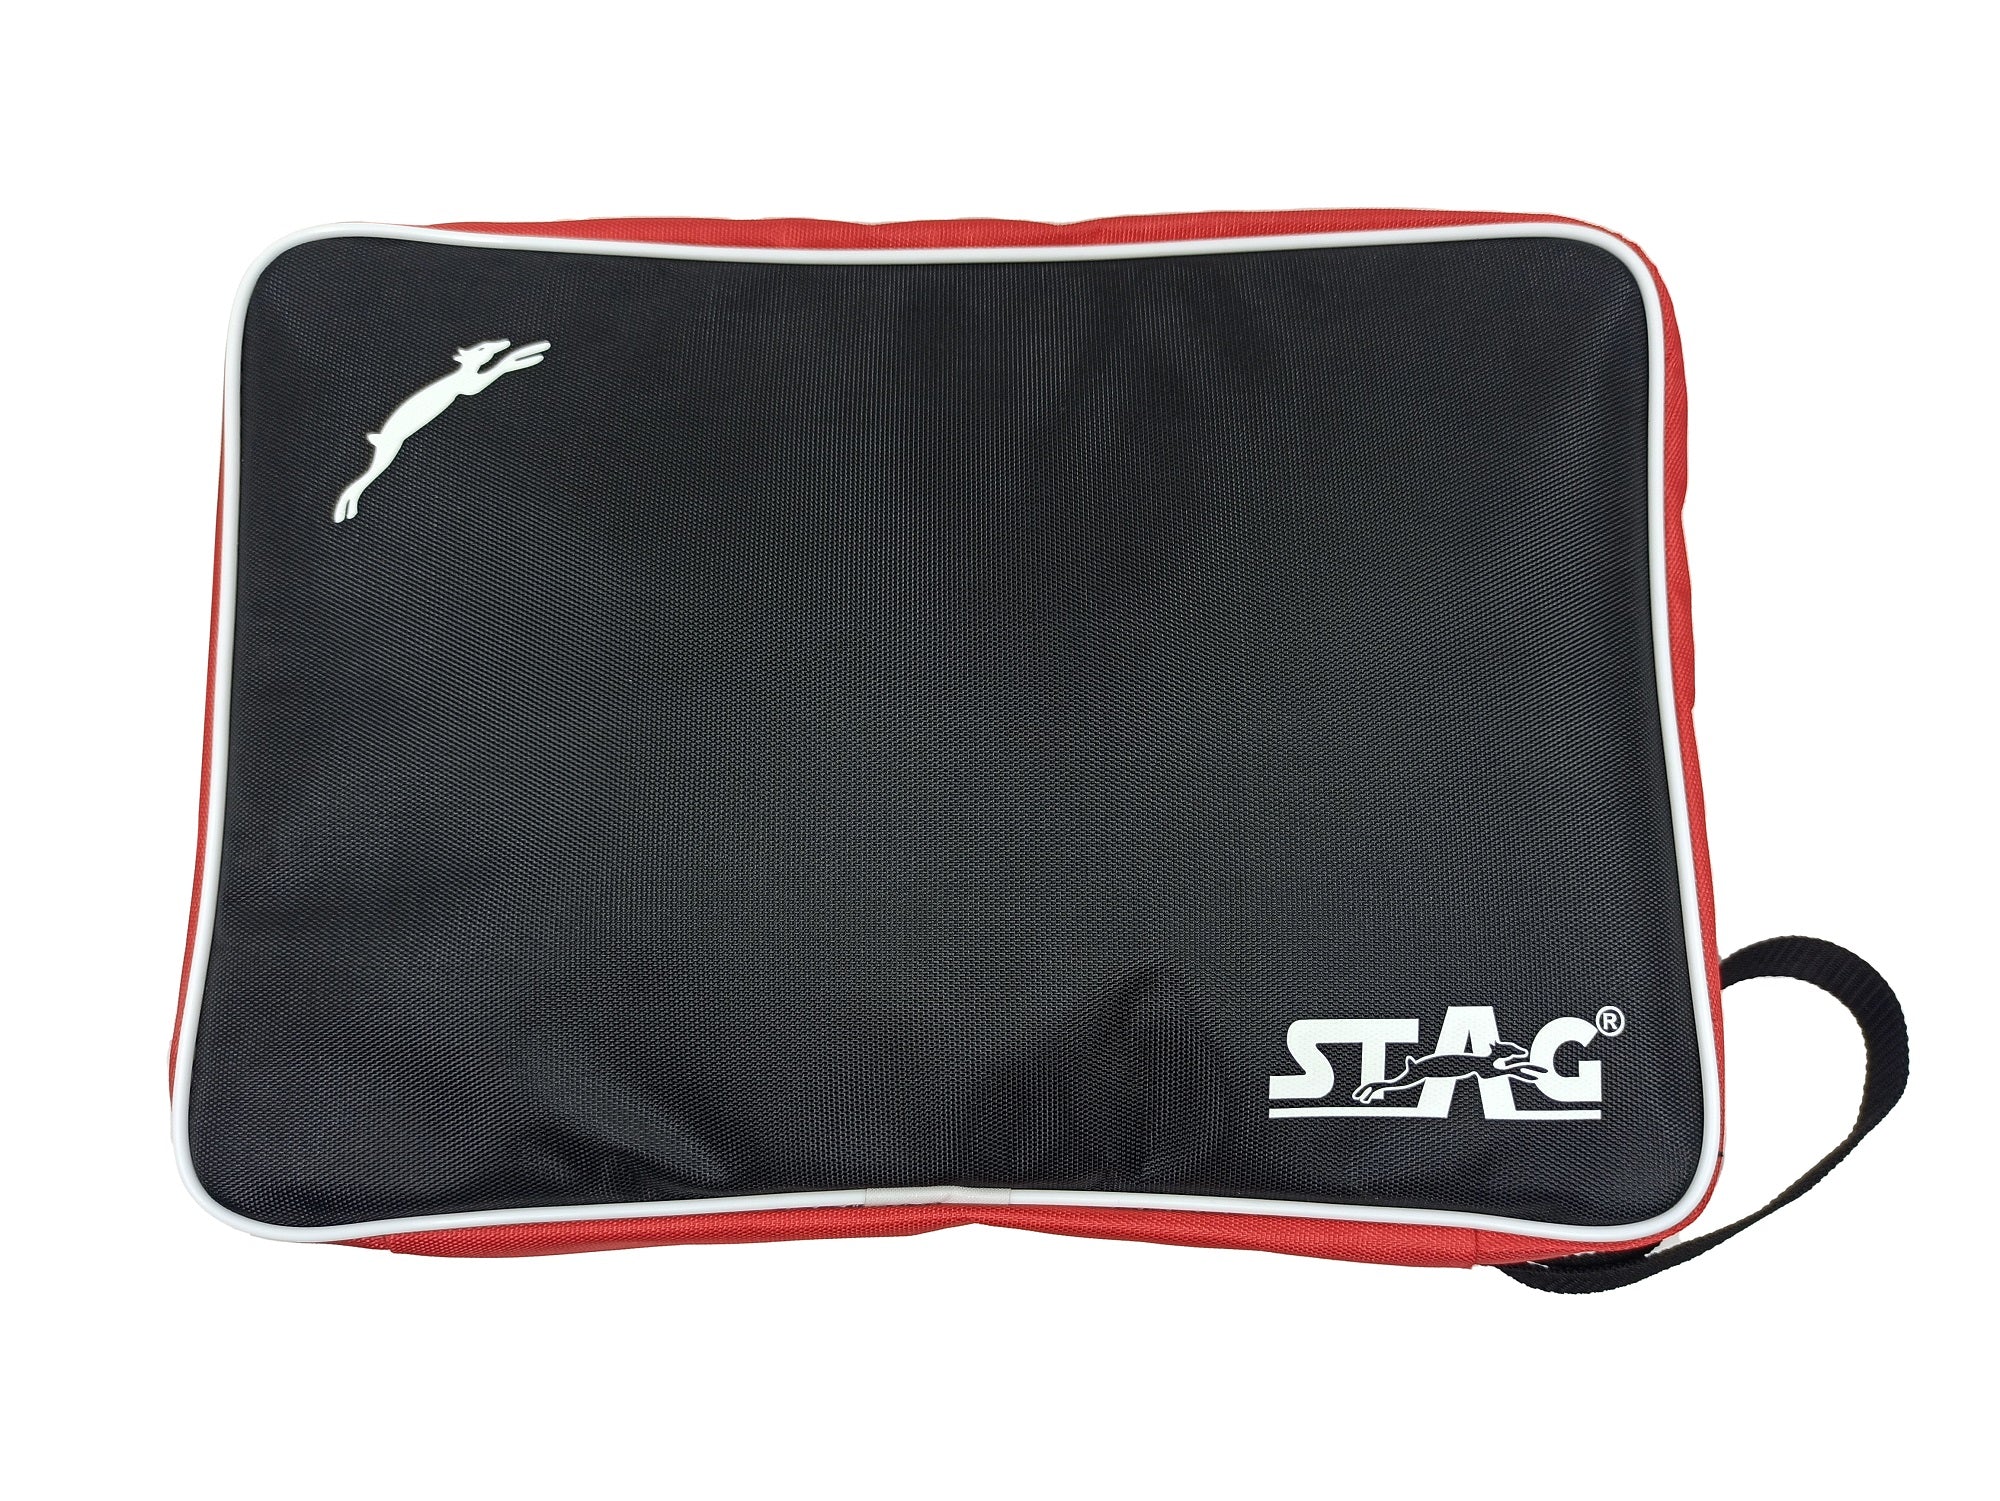 Stag DOUBLE CHAIN DELUXE RACKET CASE WITH POCKET FOR ACCESSORIES (ONLY CASE)